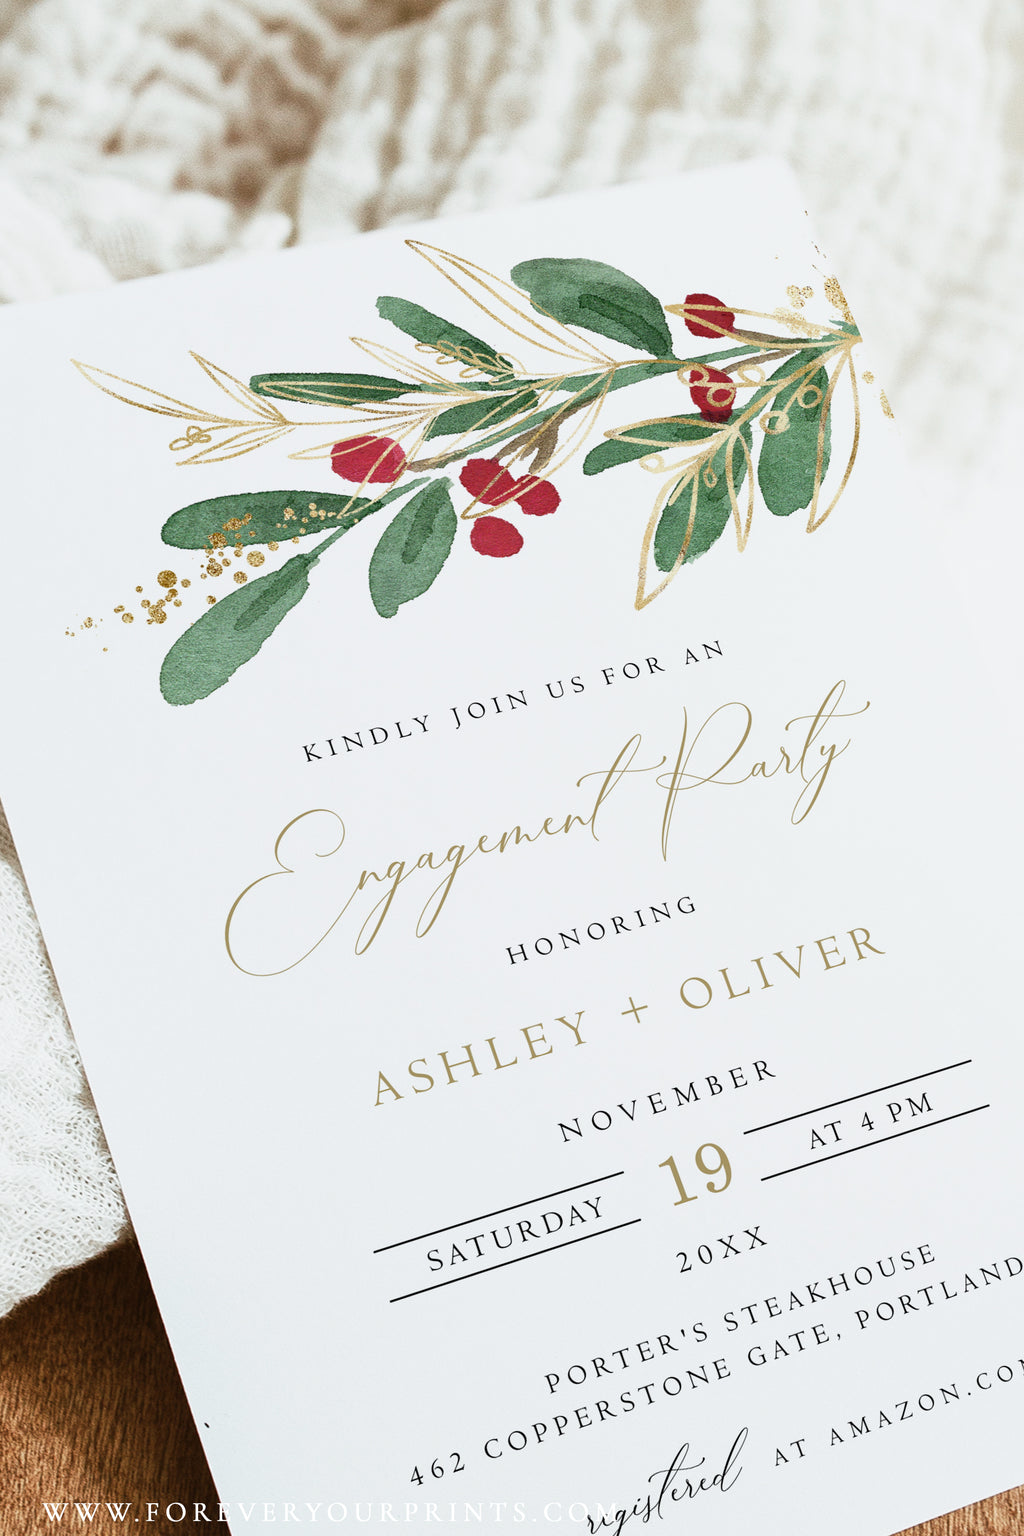 Winter Engagement Invitation Template | www.foreveryourprints.com